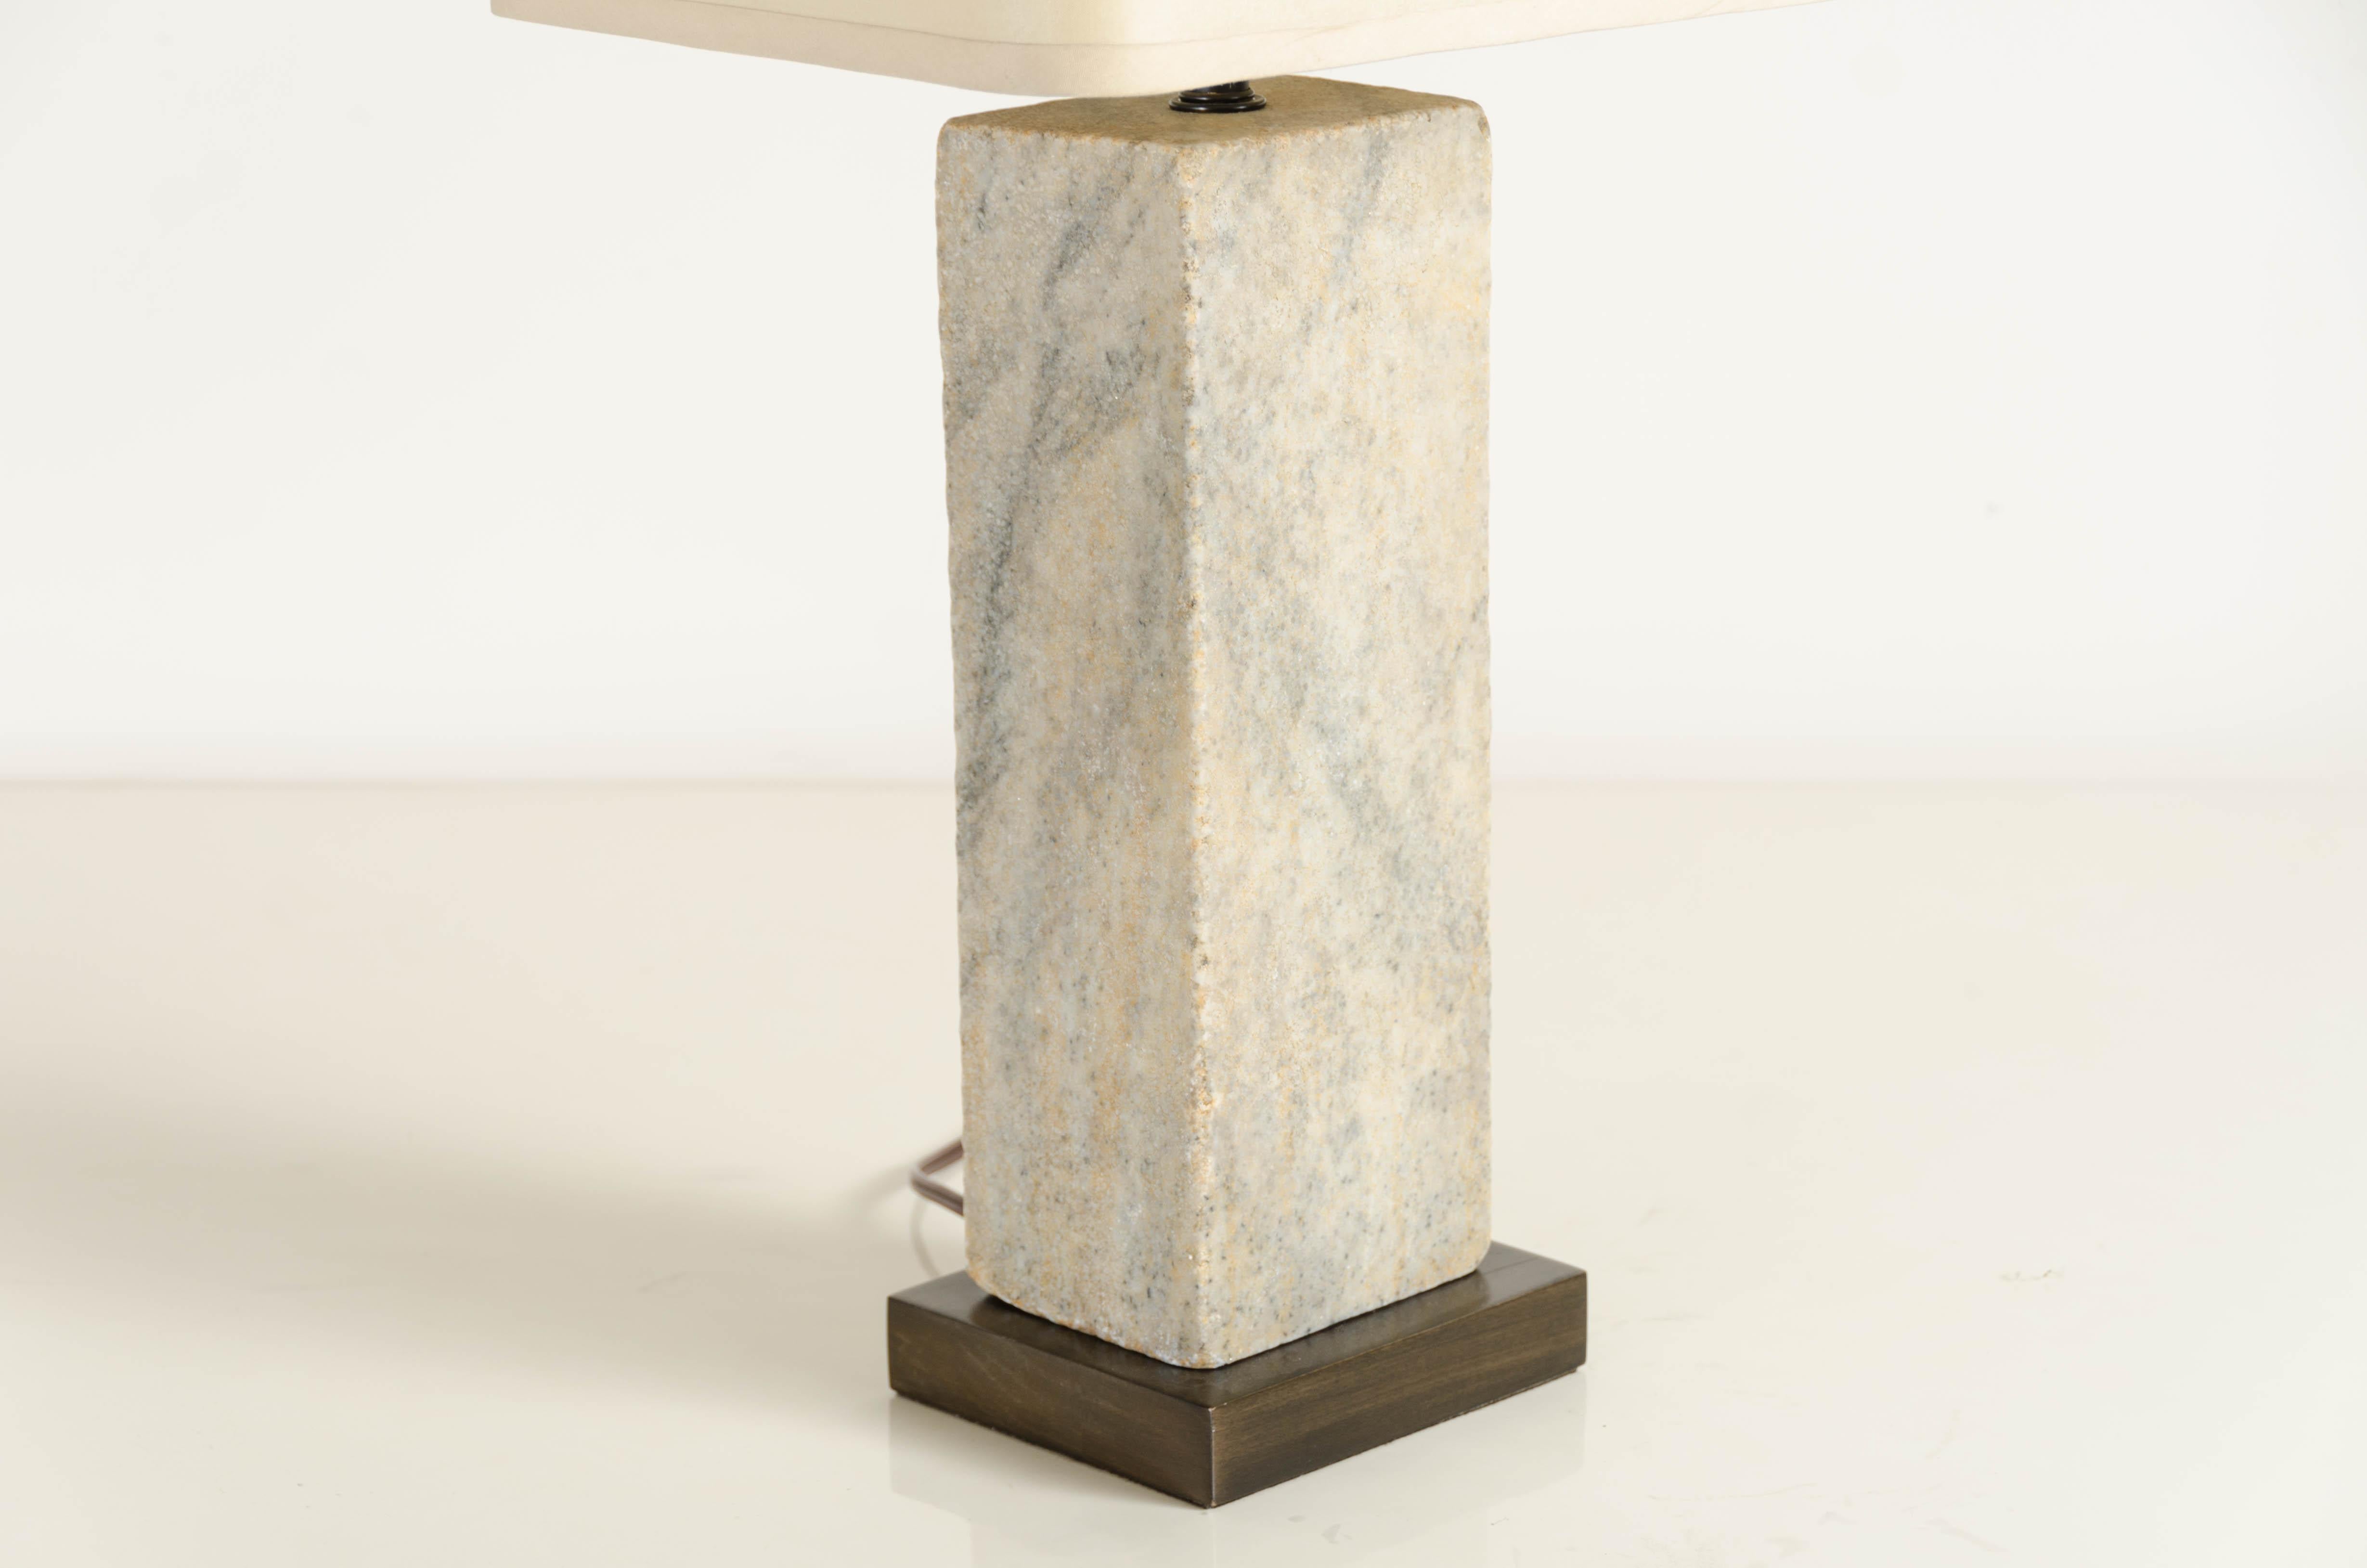 Chinese Vertical Stone Lamp with Shade by Robert Kuo, Hand Carved, Limited Edition For Sale